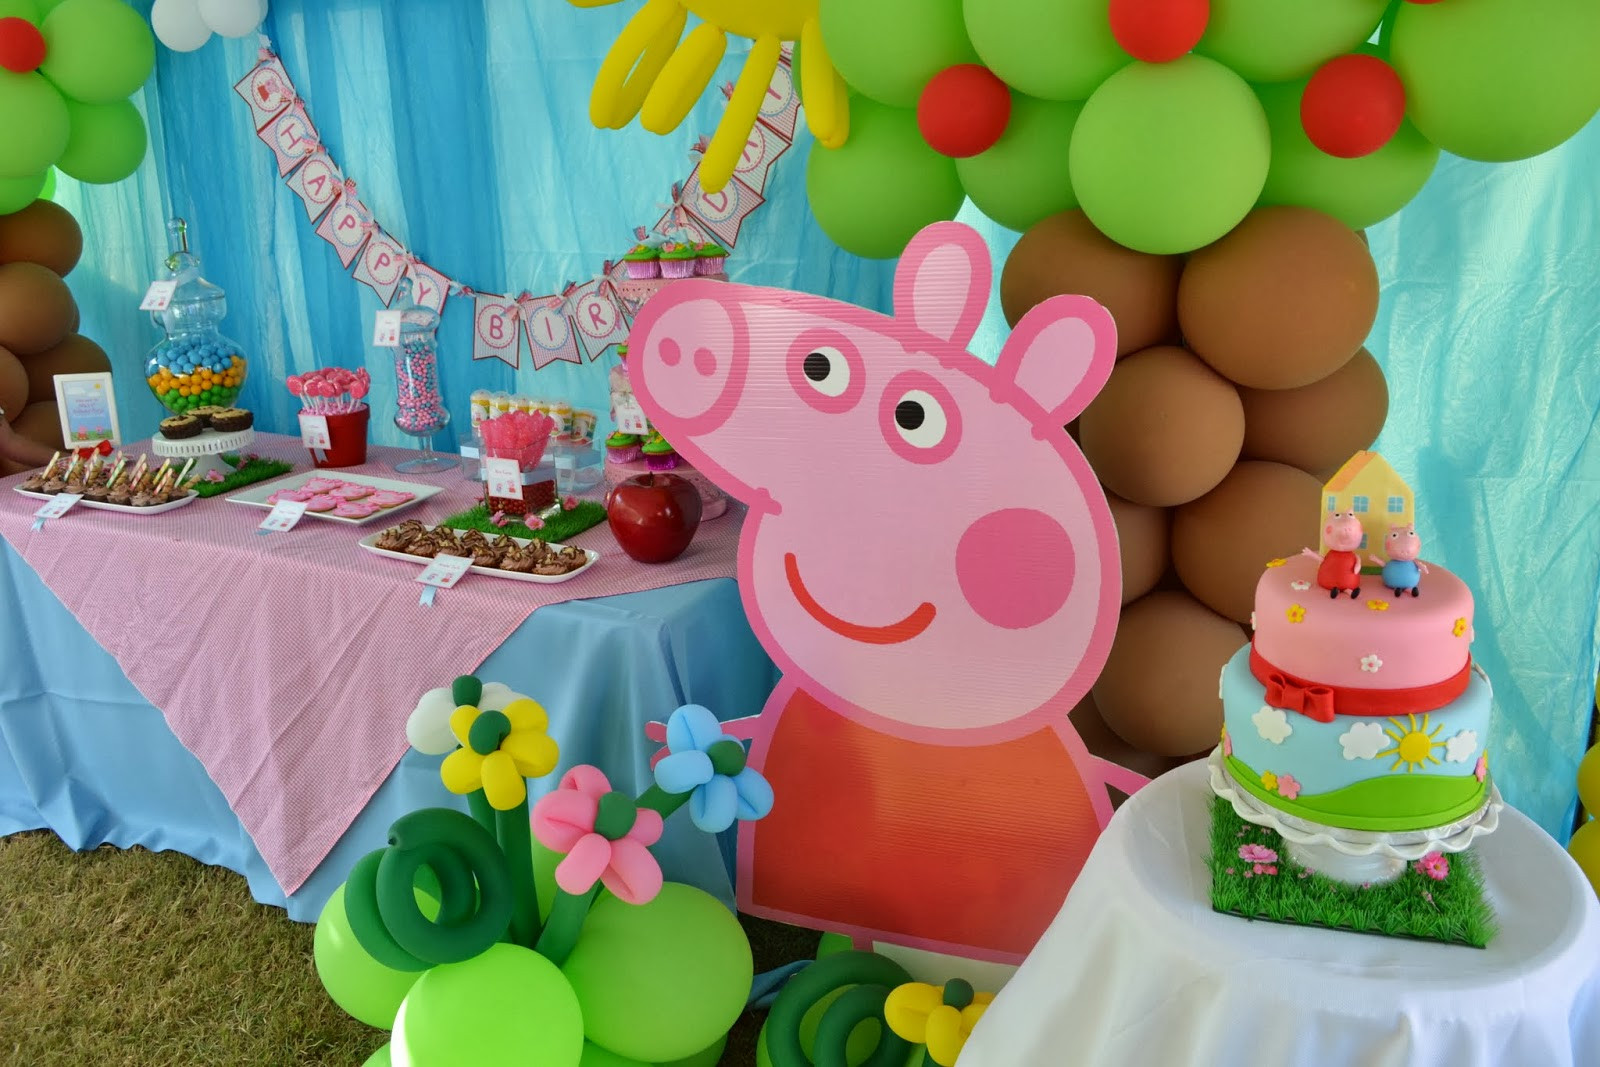 Peppa Pig Birthday Party Decorations
 Partylicious Events PR Peppa Pig Party